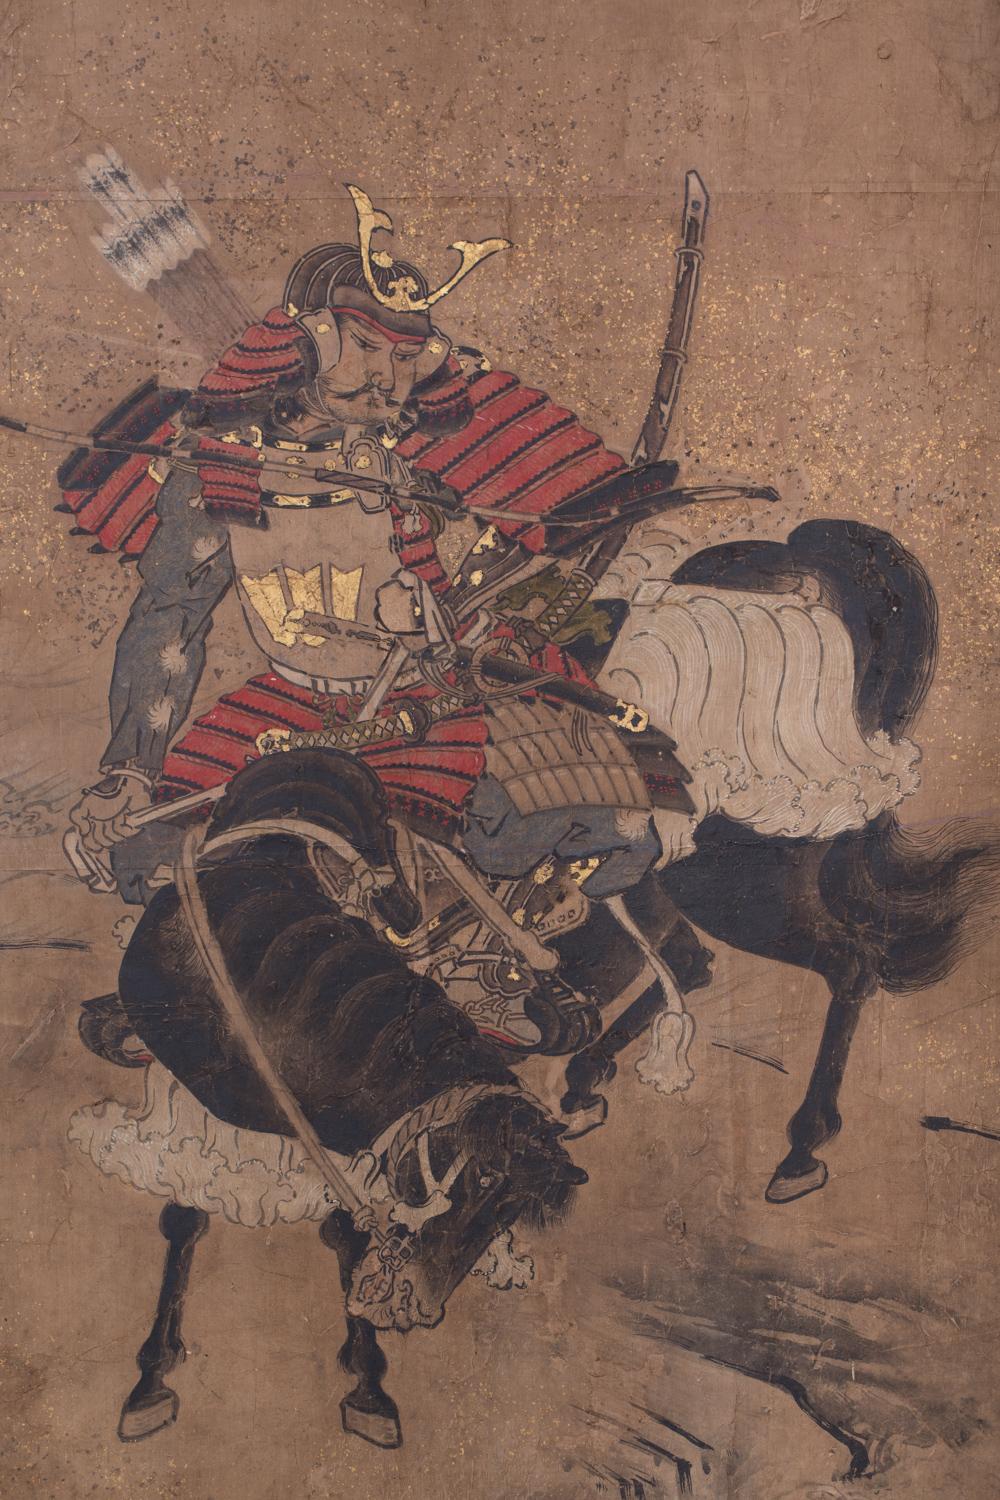 This screen depicts two Heike generals, Sasaki Takatsuna and Kajiwara Kagesue, on their horses, crossing the Uji River which signaled the beginning of the first Battle at Uji Bridge. The Heike were pursuing Prince Mochihito and Minamoto Yorimasa,